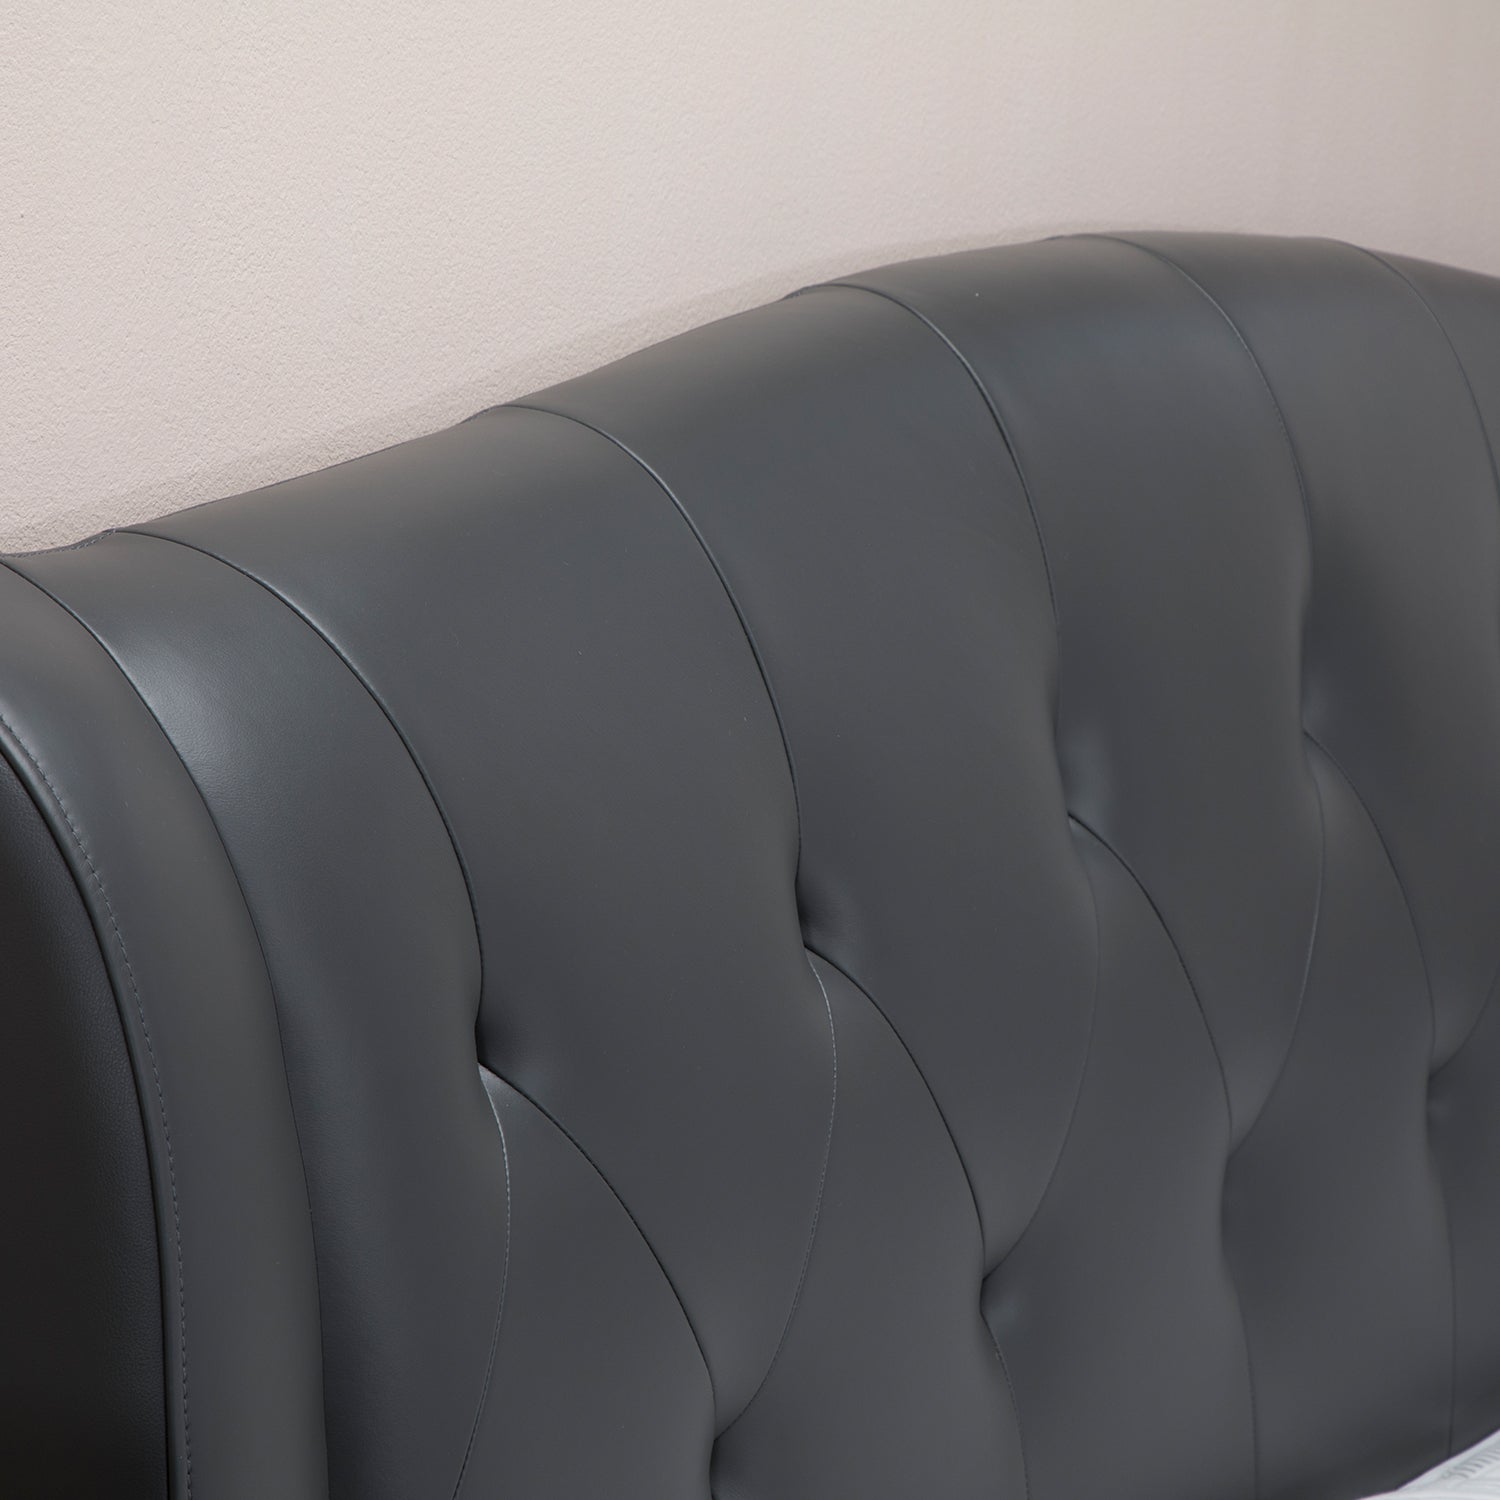 Dark gray leather upholstered bed frame backrest with a tufted design, showcasing a sleek and contemporary look